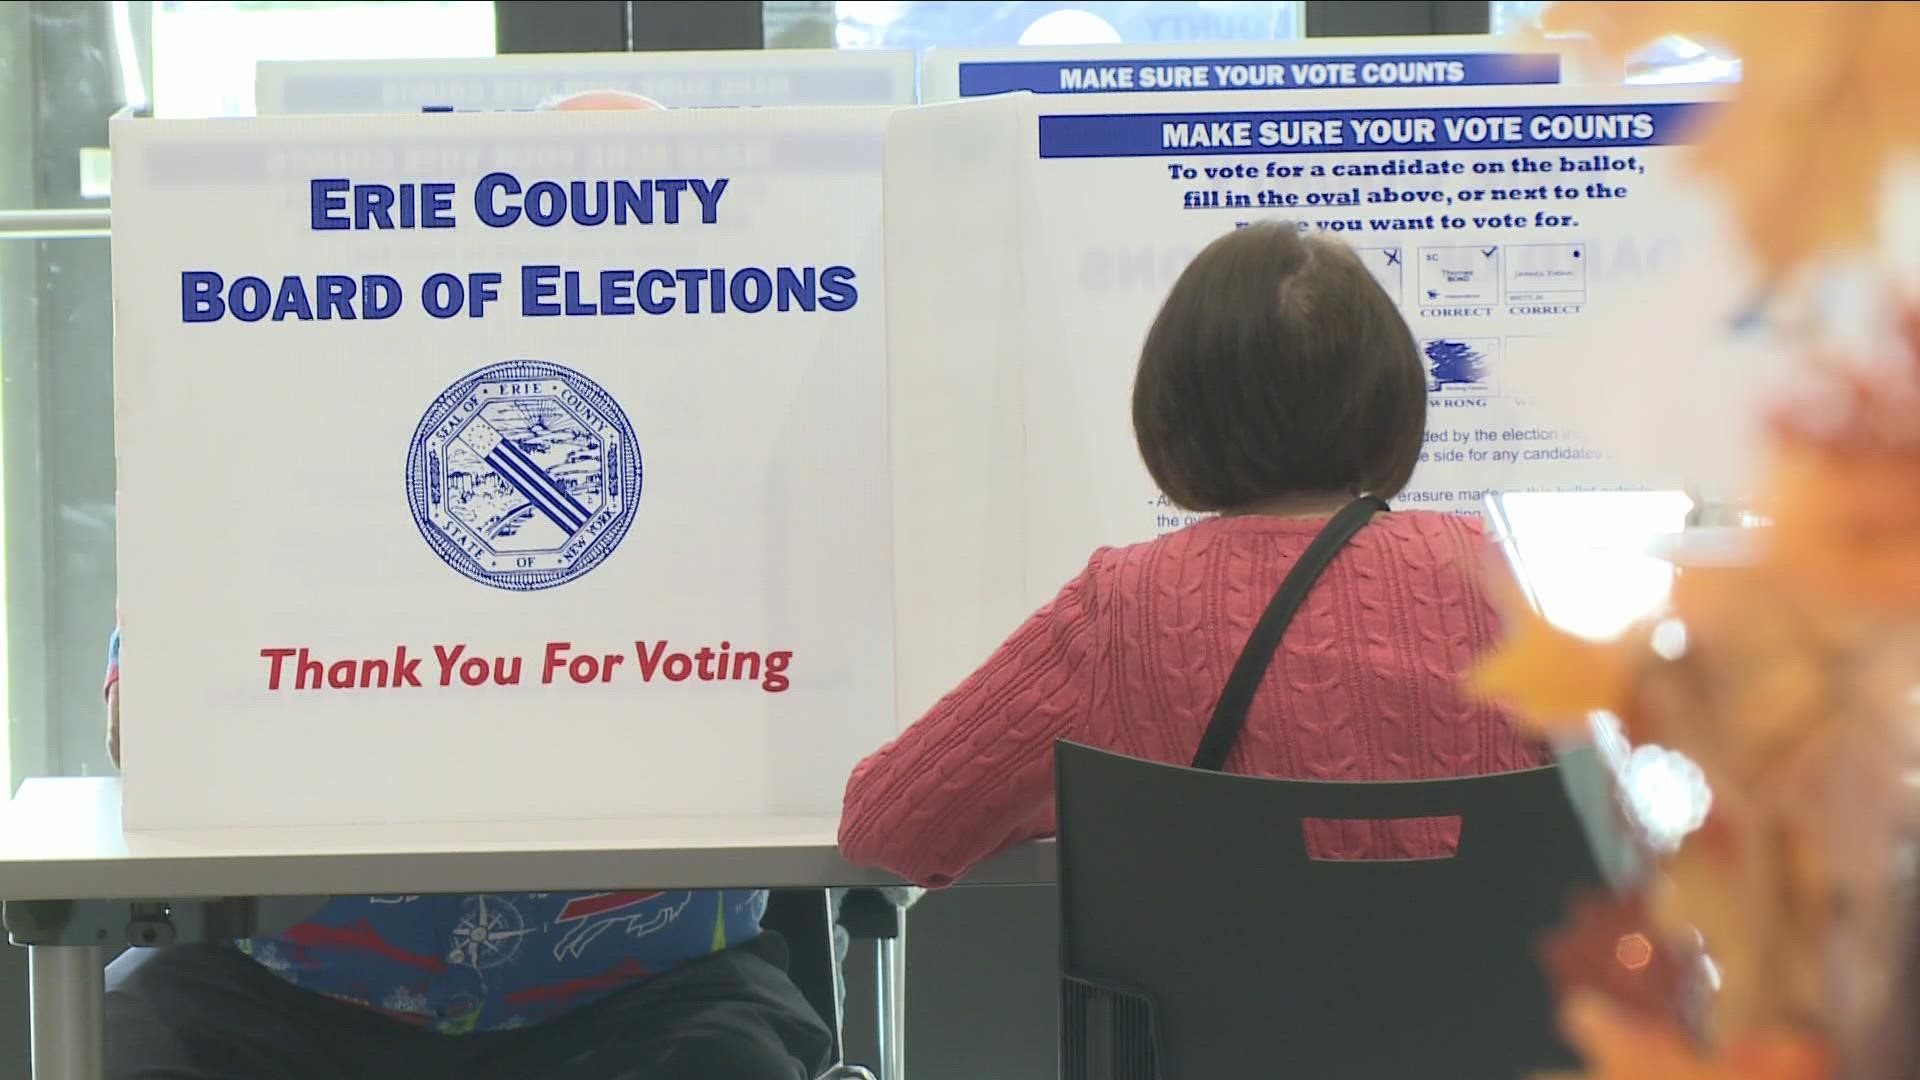 The 2-day total in Erie County is 14,808, according to Erie County Board of Elections commissioners Ralph Mohr and Jeremy Zellner.